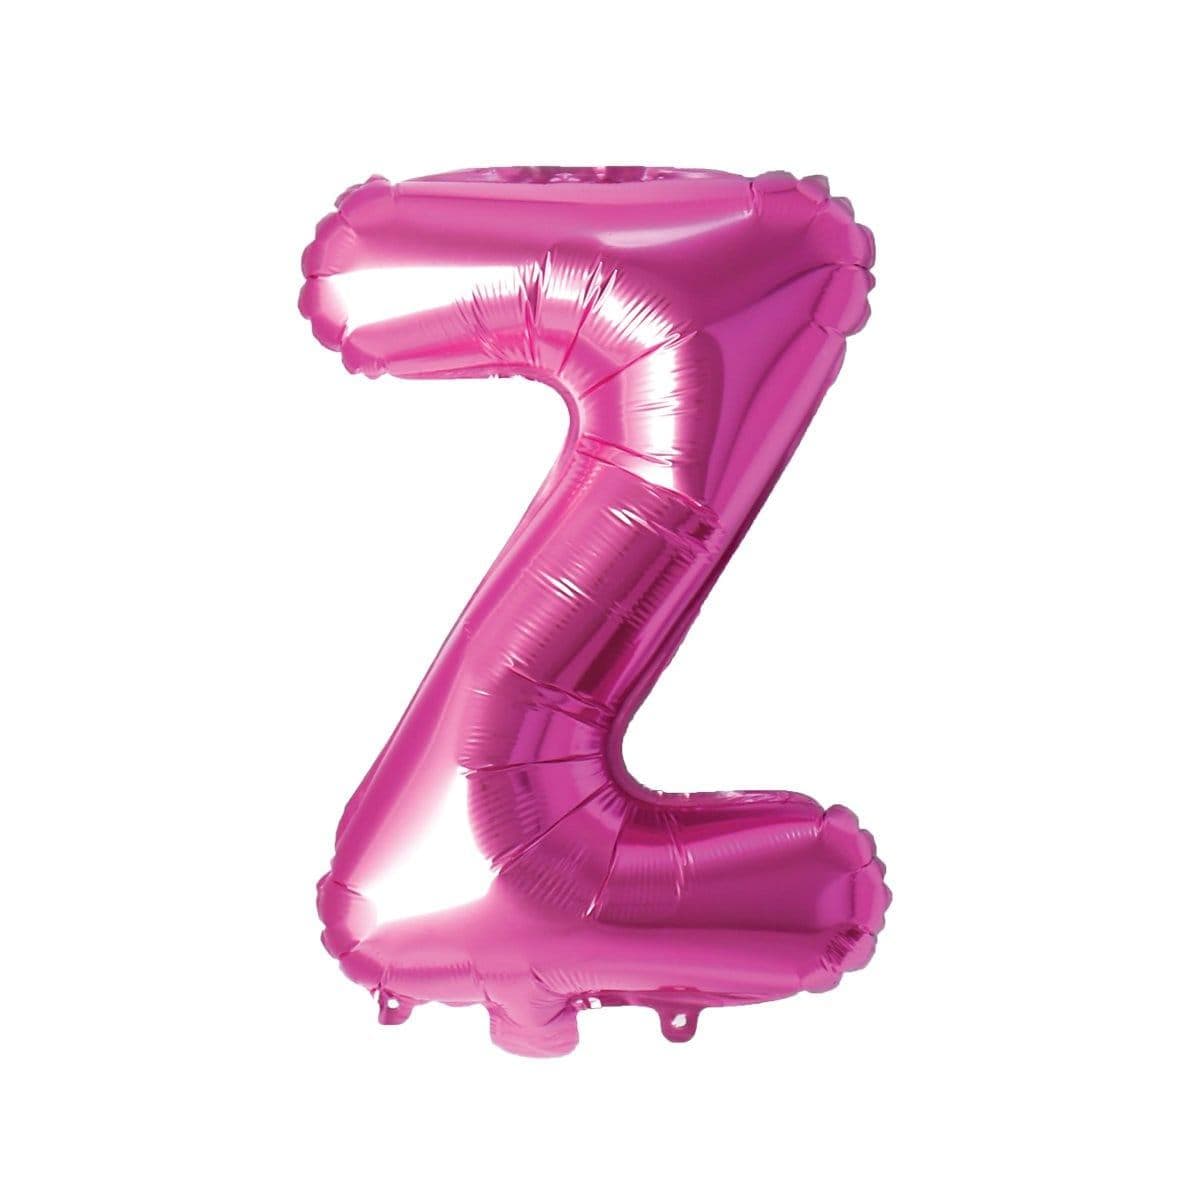 Buy Balloons Pink Letter Z Foil Balloon, 16 Inches sold at Party Expert